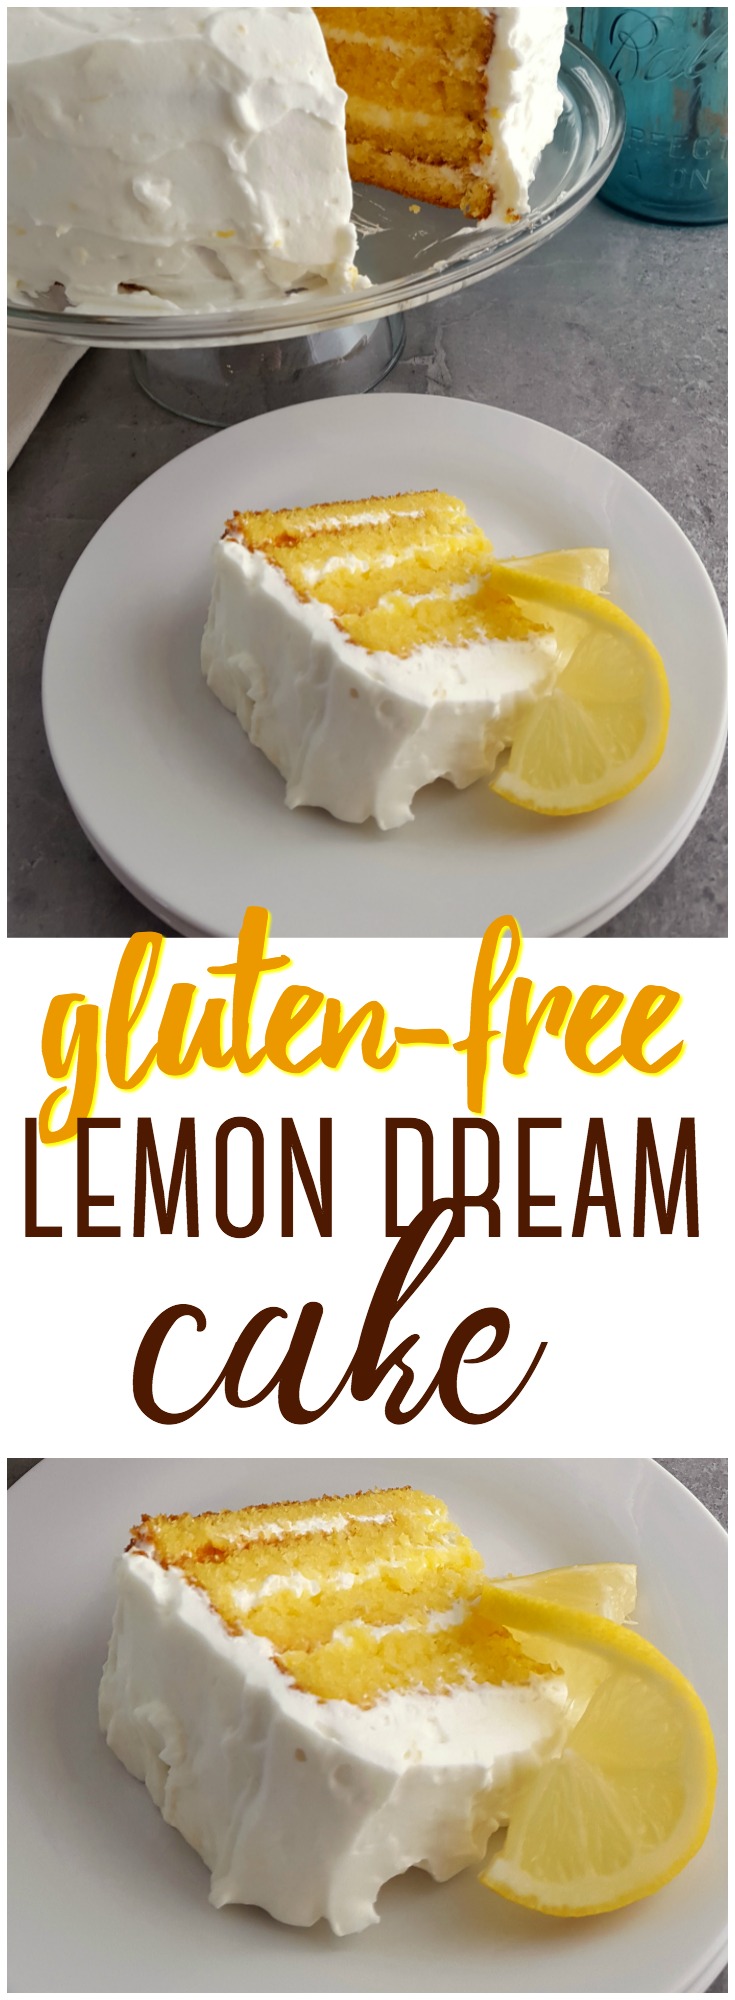 This light and fluffy Lemon Dream Cake is the perfect gluten-free dessert to welcome spring and is the perfect way to celebrate a birthday!